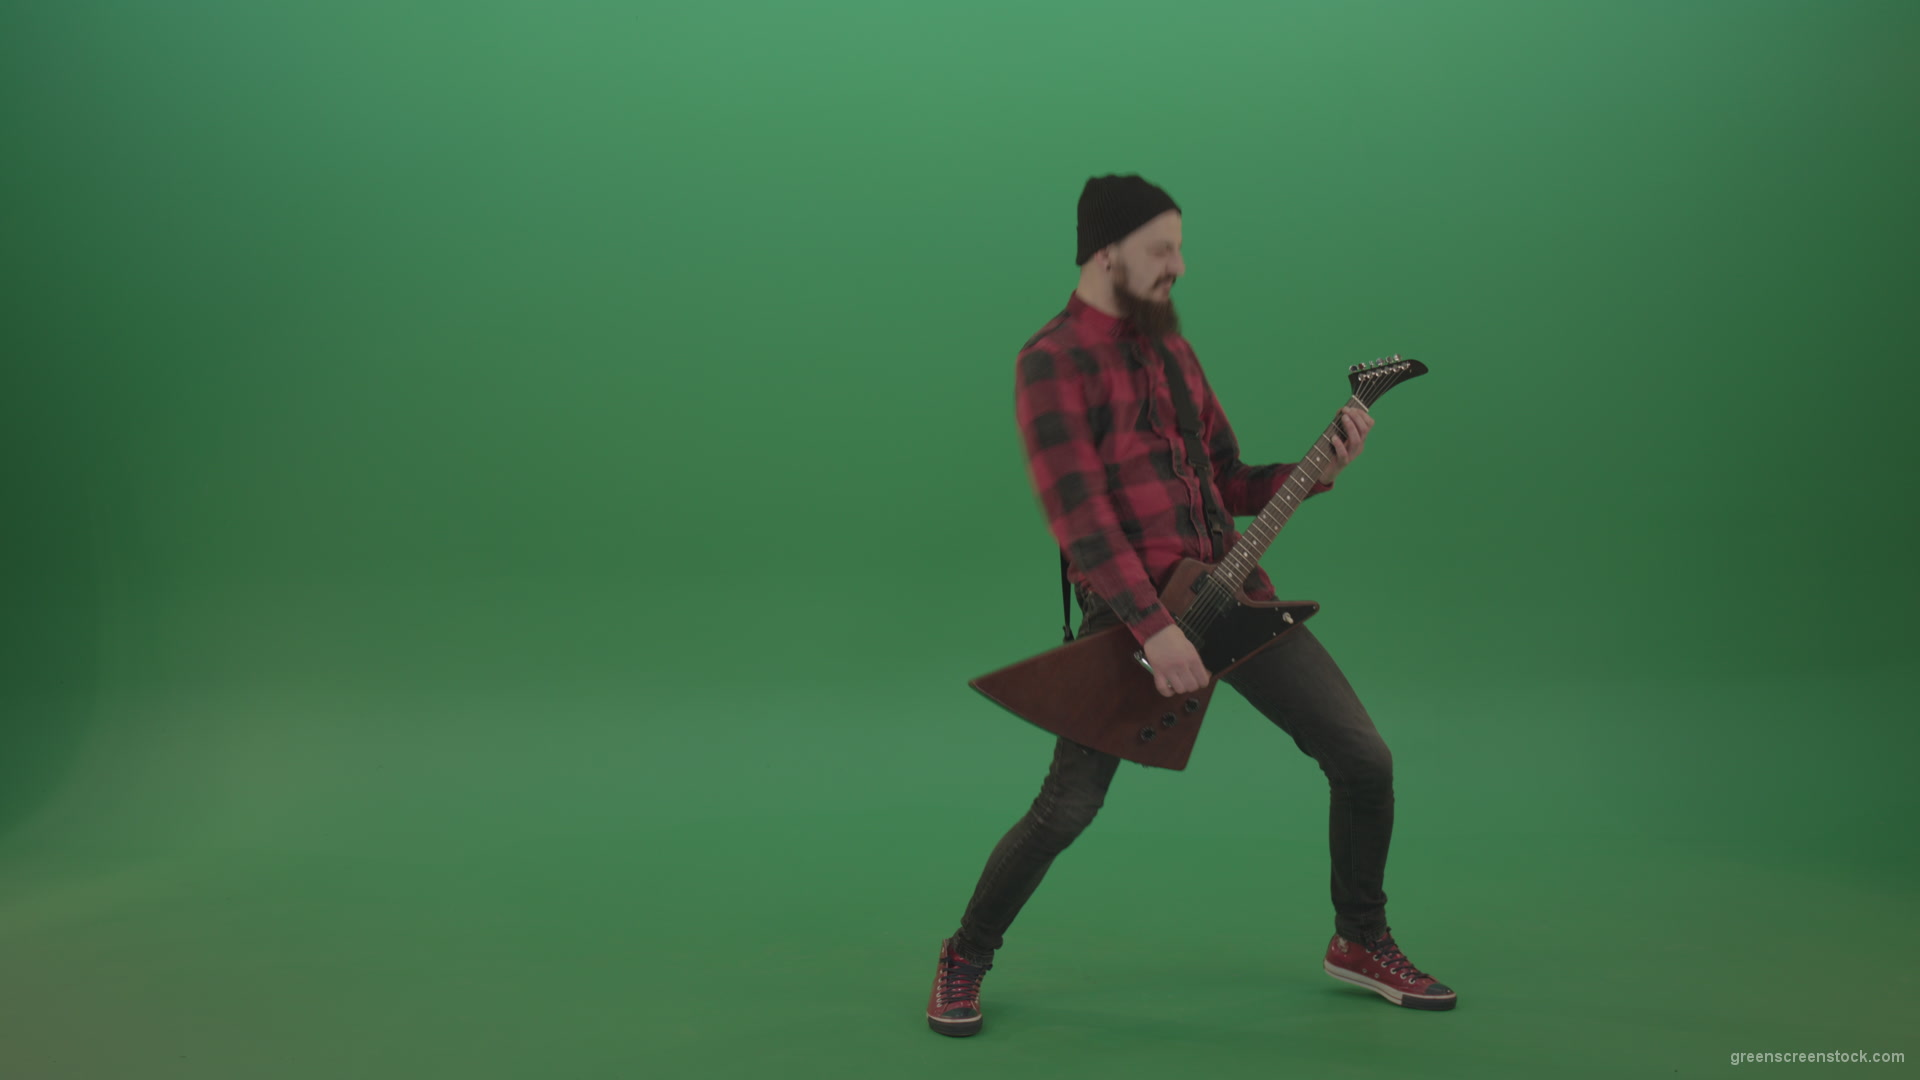 Punk-rock-full-size-man-guitarist-play-guitar-with-emotions-on-green-screen_007 Green Screen Stock